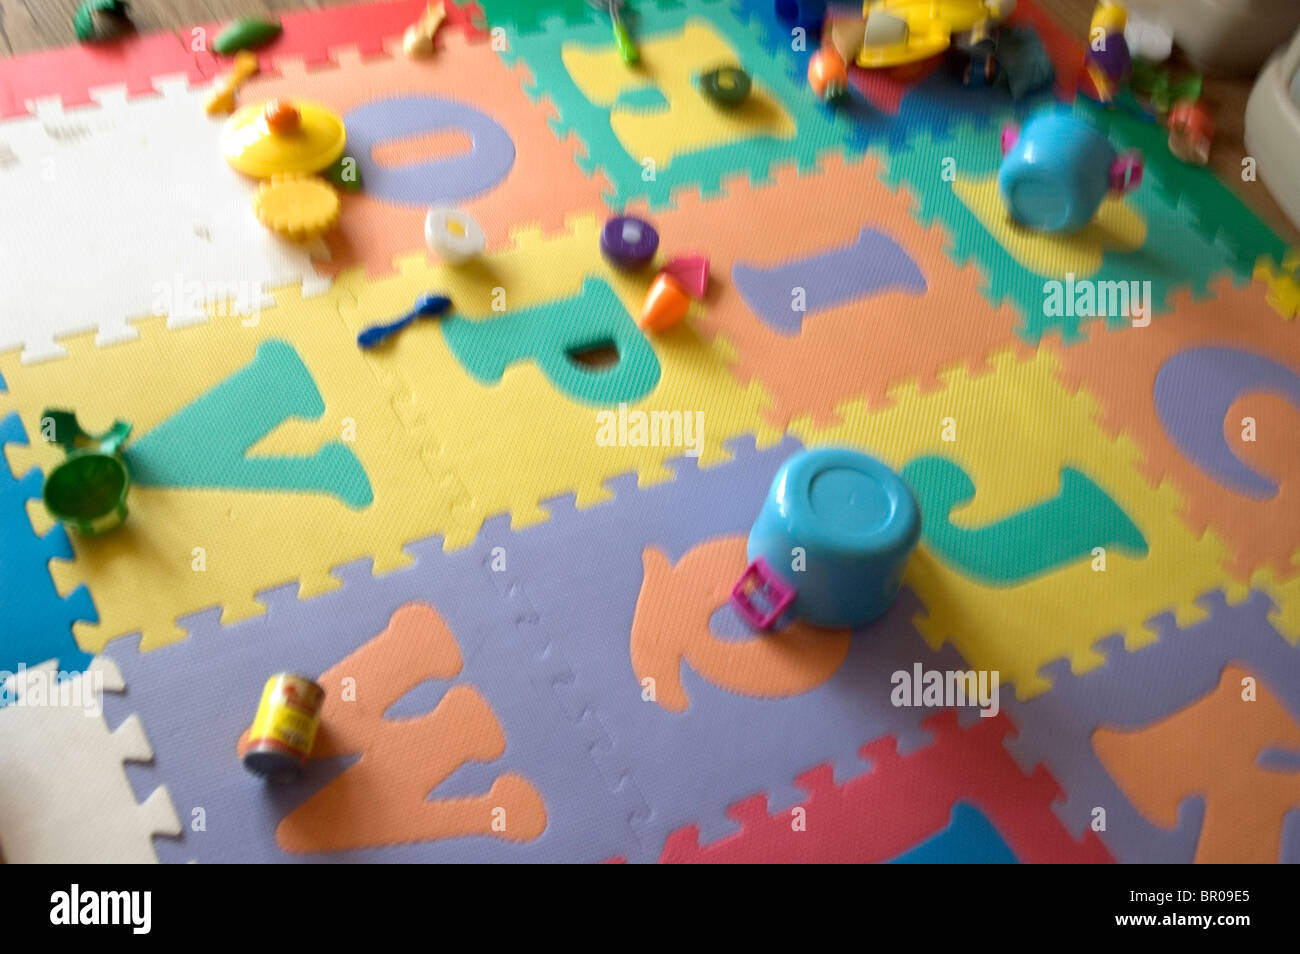 Abstract of children's playroom Stock Photo